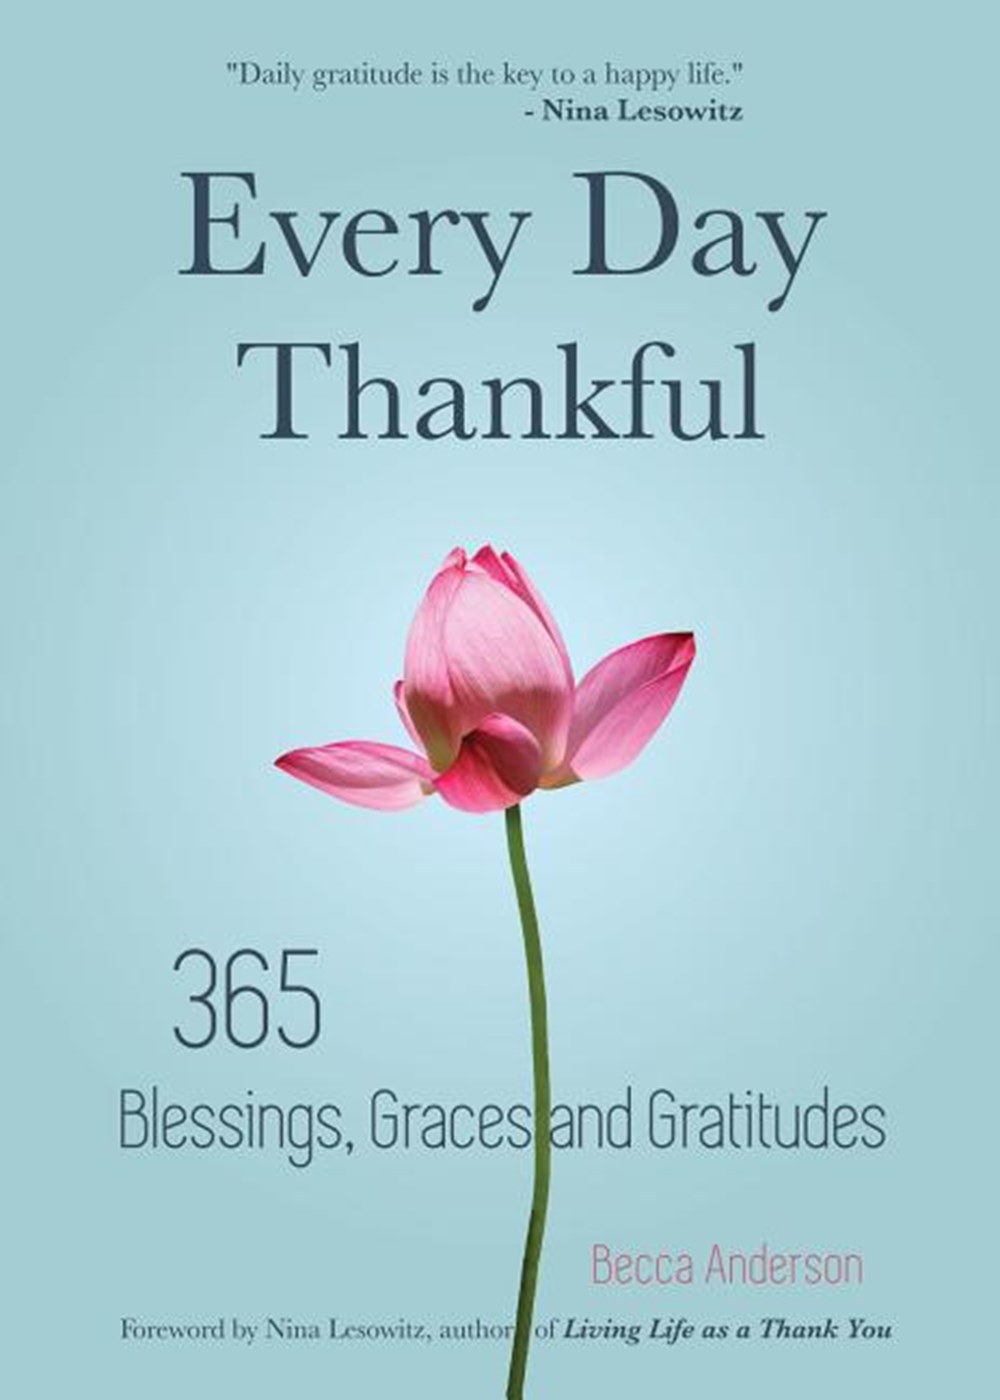 Every Day Thankful: 365 Blessings, Graces and Gratitudes (Alcoholics Anonymous, Daily Reflections, C